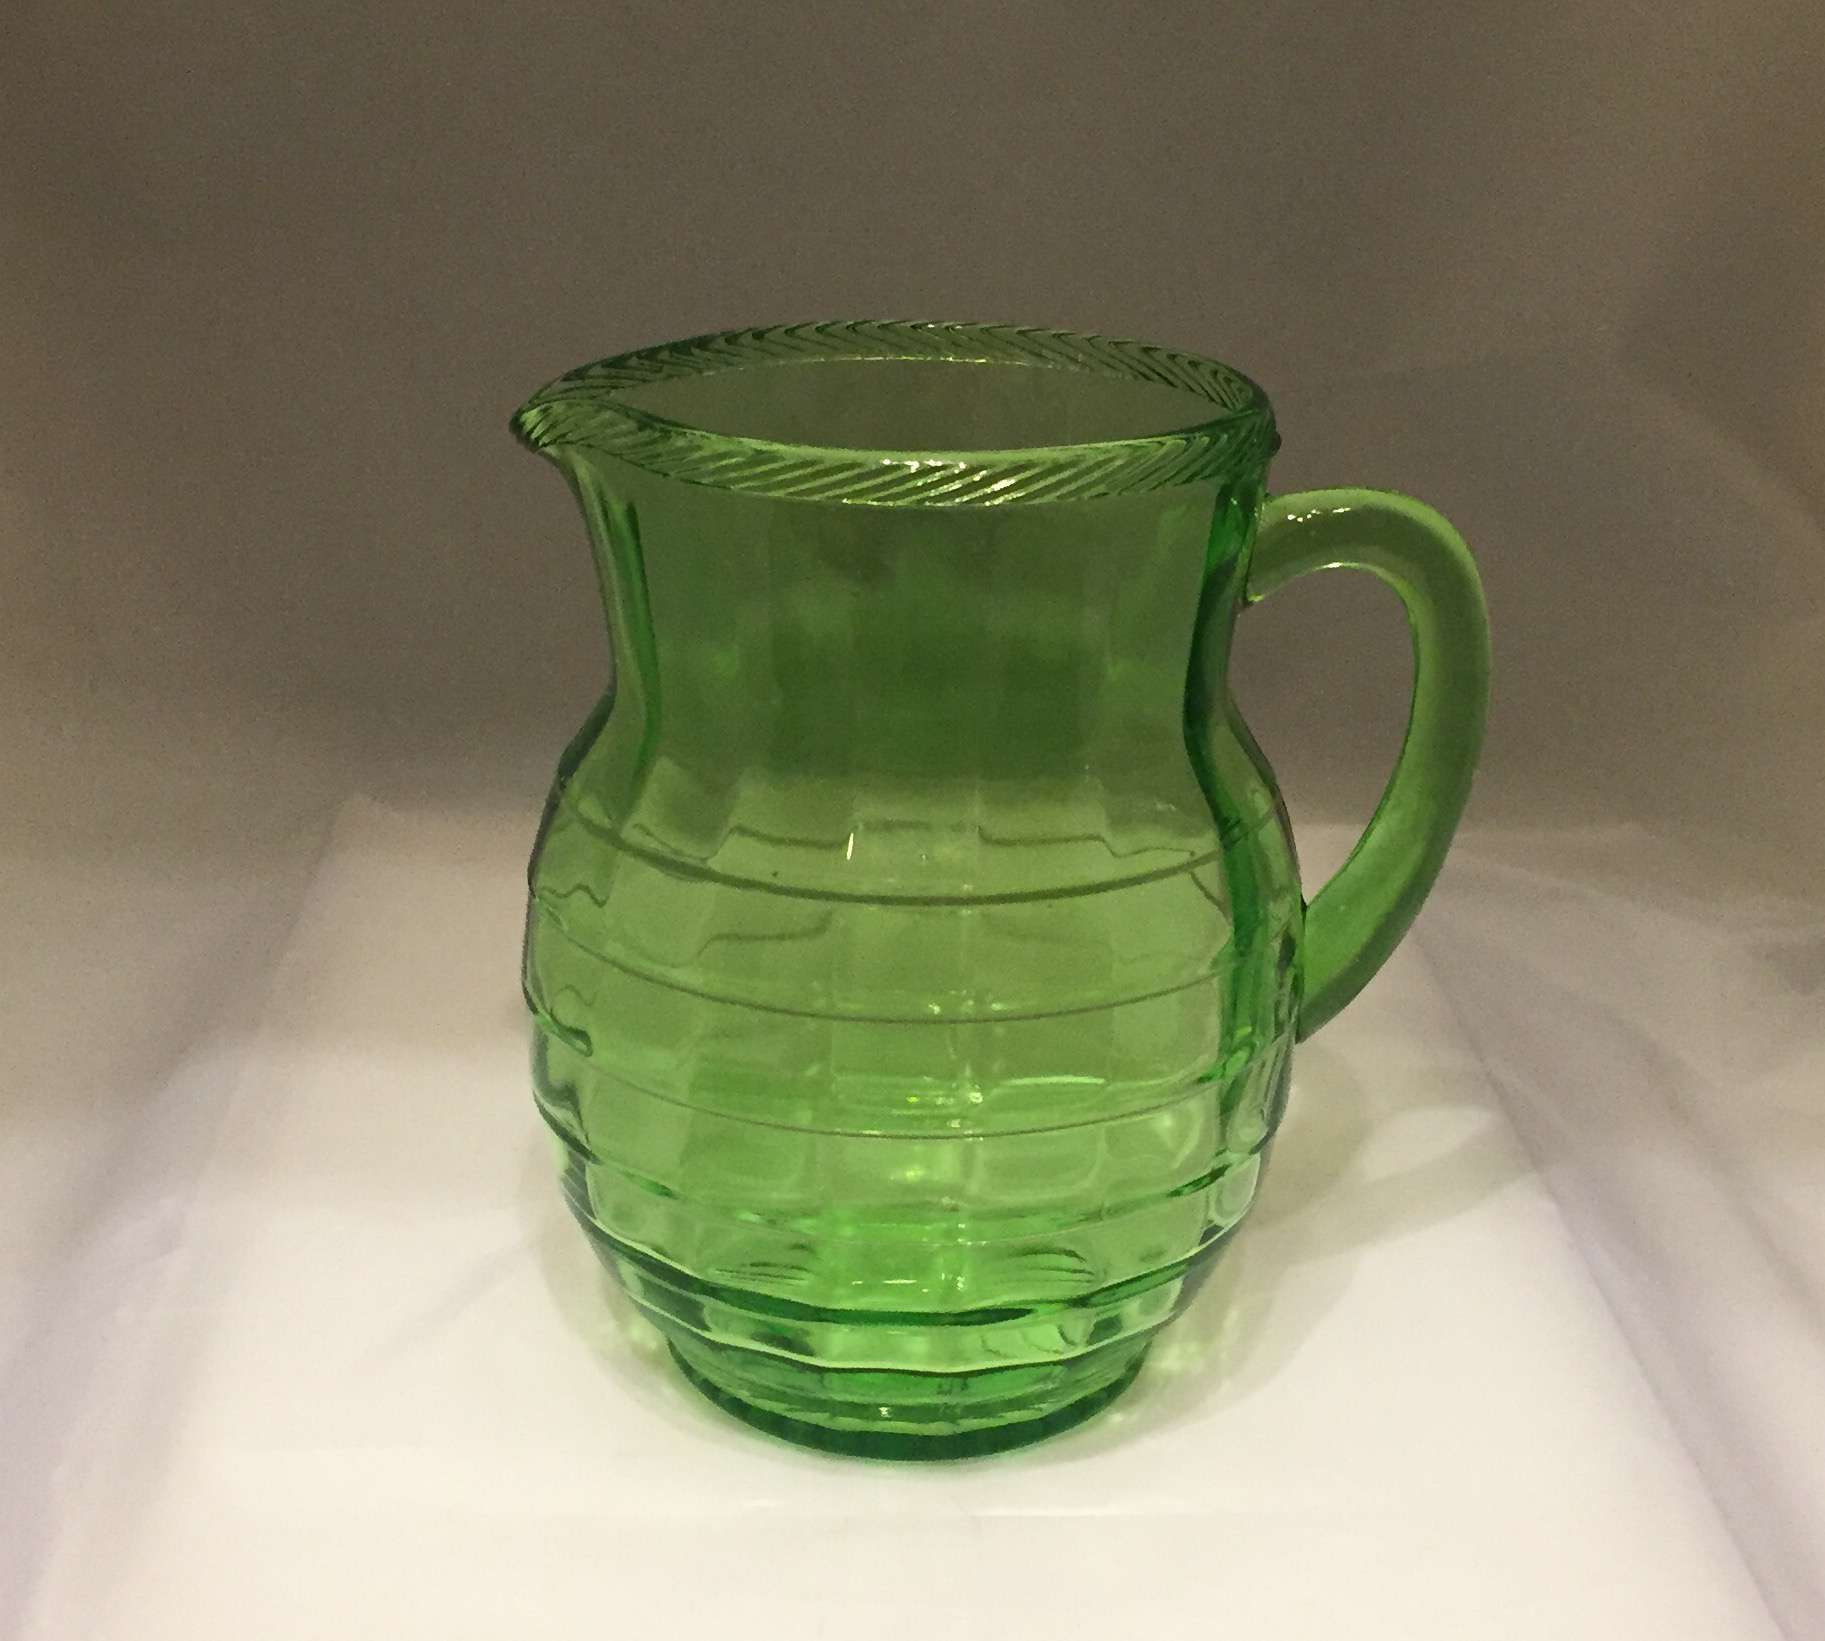 30 attractive Glass Pitcher Vase 2022 free download glass pitcher vase of 22 hobnail glass vase the weekly world for depression glass price guide and pattern identification